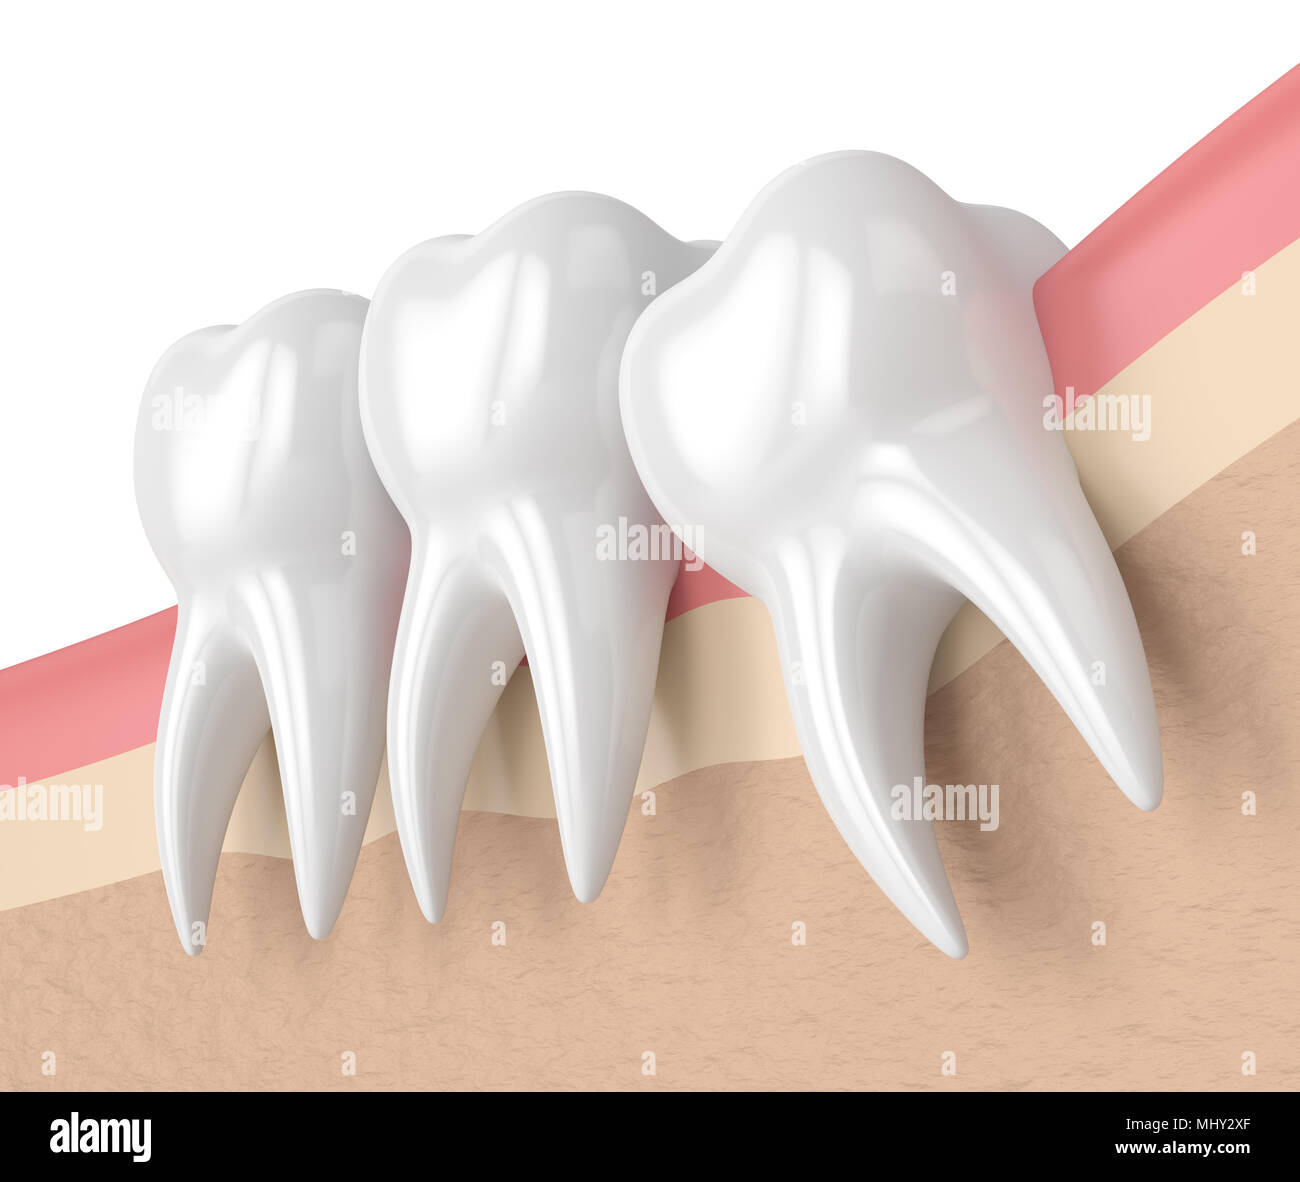 3d render of teeth with wisdom mesial impaction. Concept of different types of wisdom teeth impactions. Stock Photo